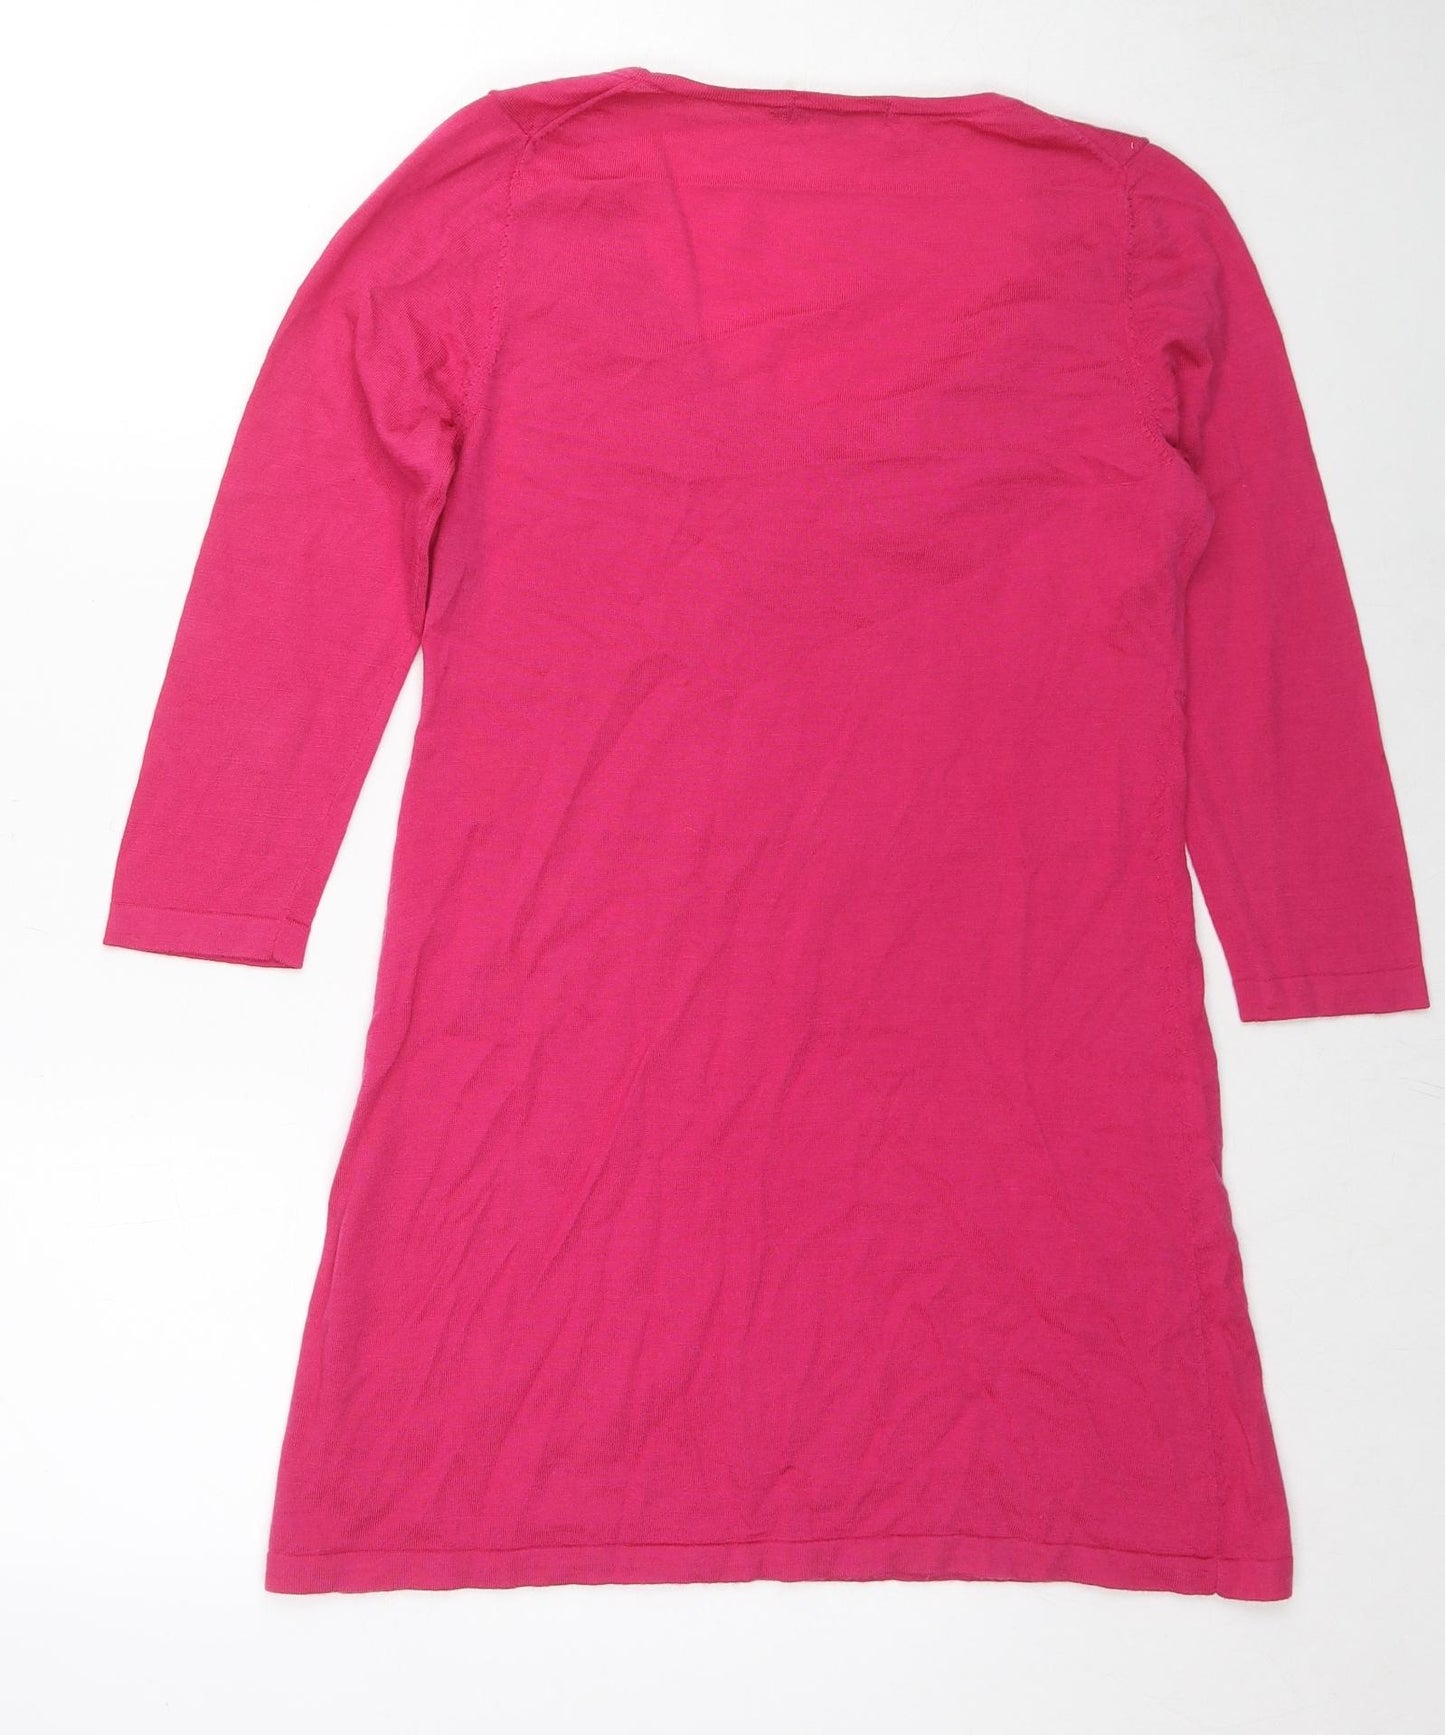 Boden Womens Pink V-Neck Cotton Tunic Jumper Size 12